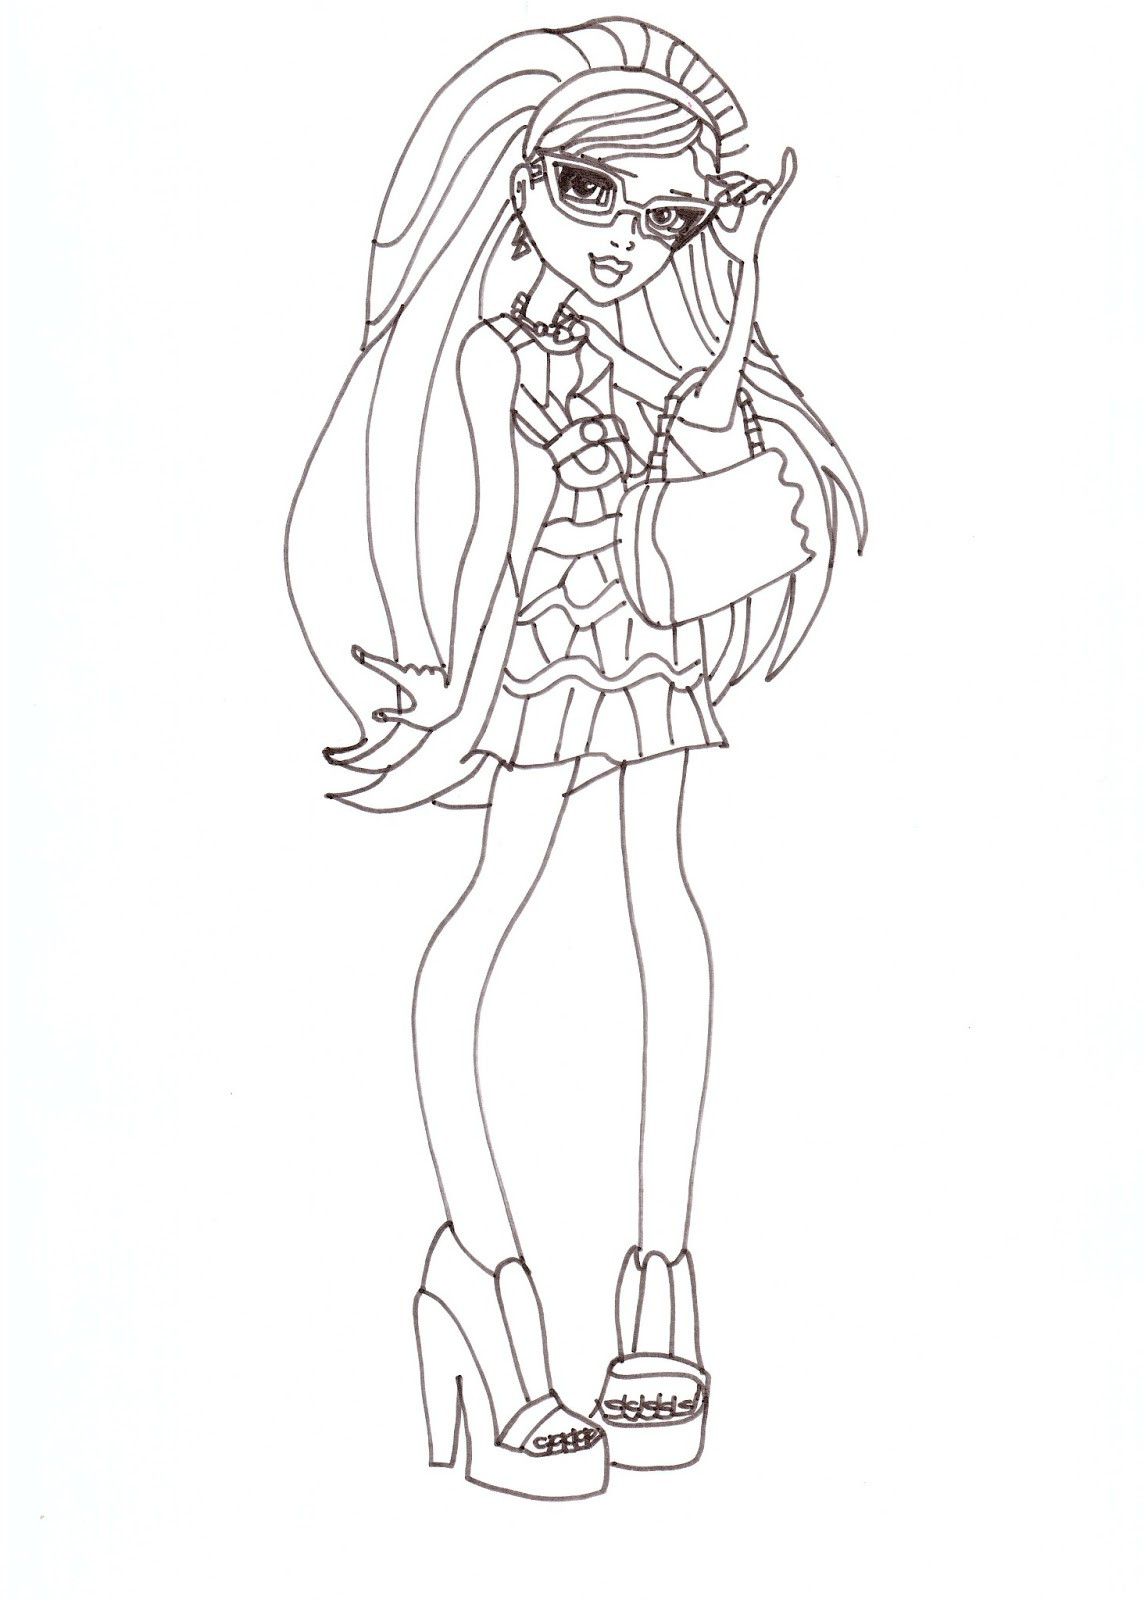 Printables Free Coloring Pages
 Free Printable Monster High Coloring Pages December 2012